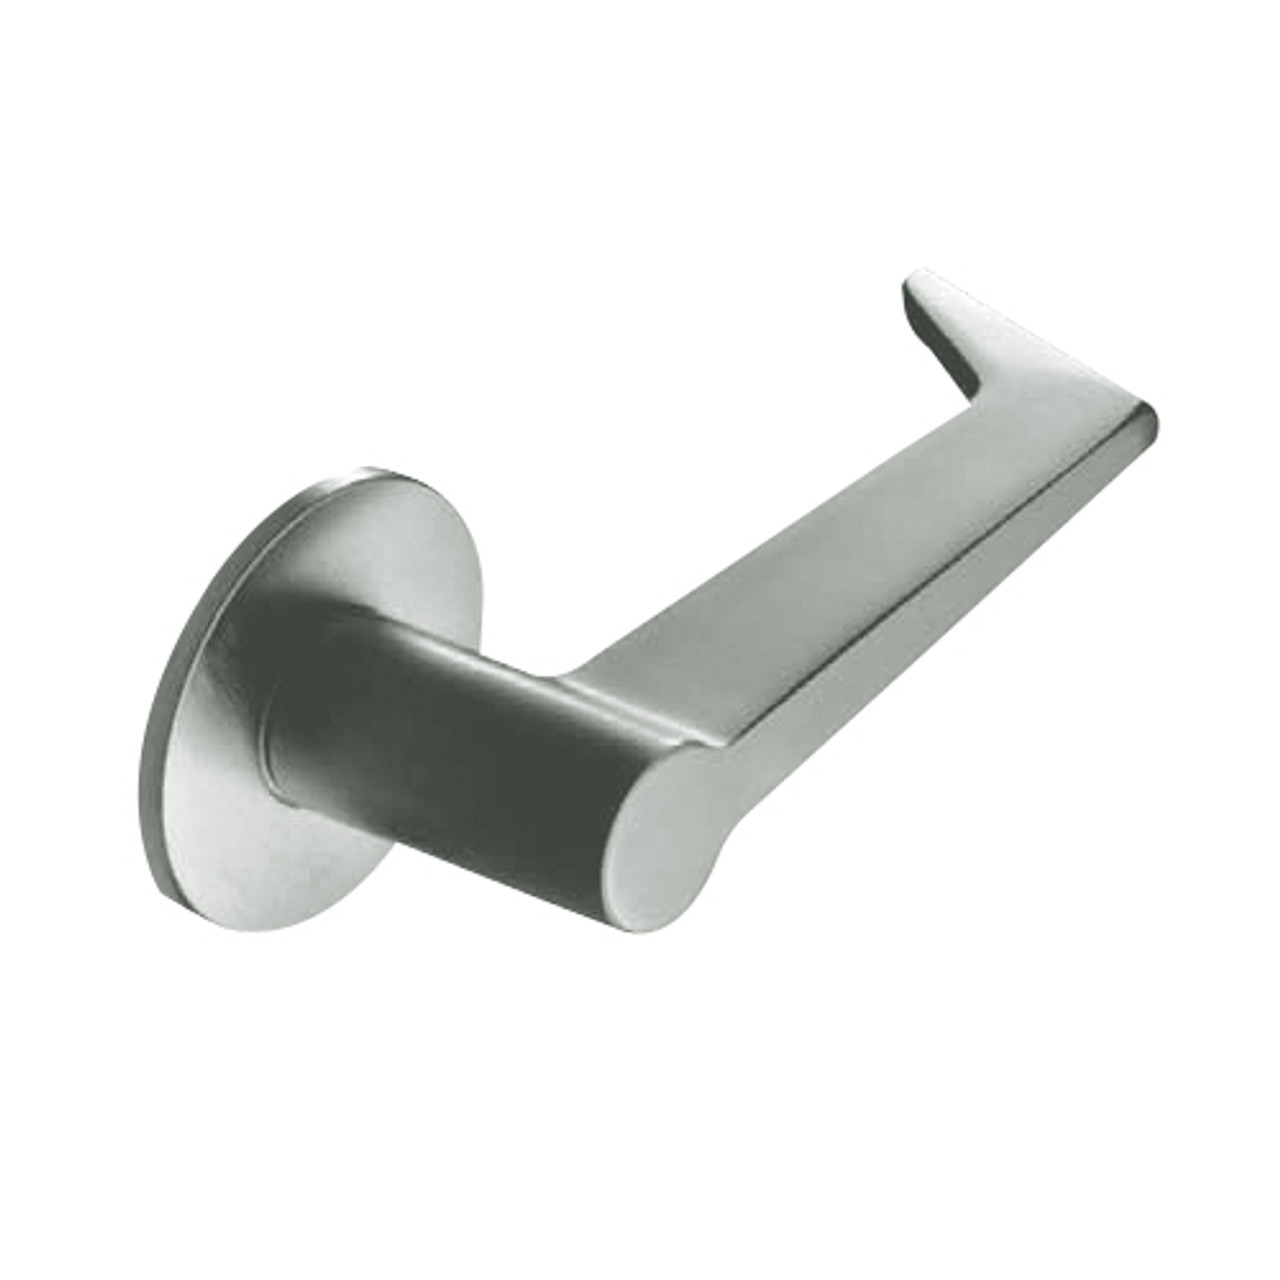 ML2065-ESF-618-LC Corbin Russwin ML2000 Series Mortise Dormitory Locksets with Essex Lever in Bright Nickel